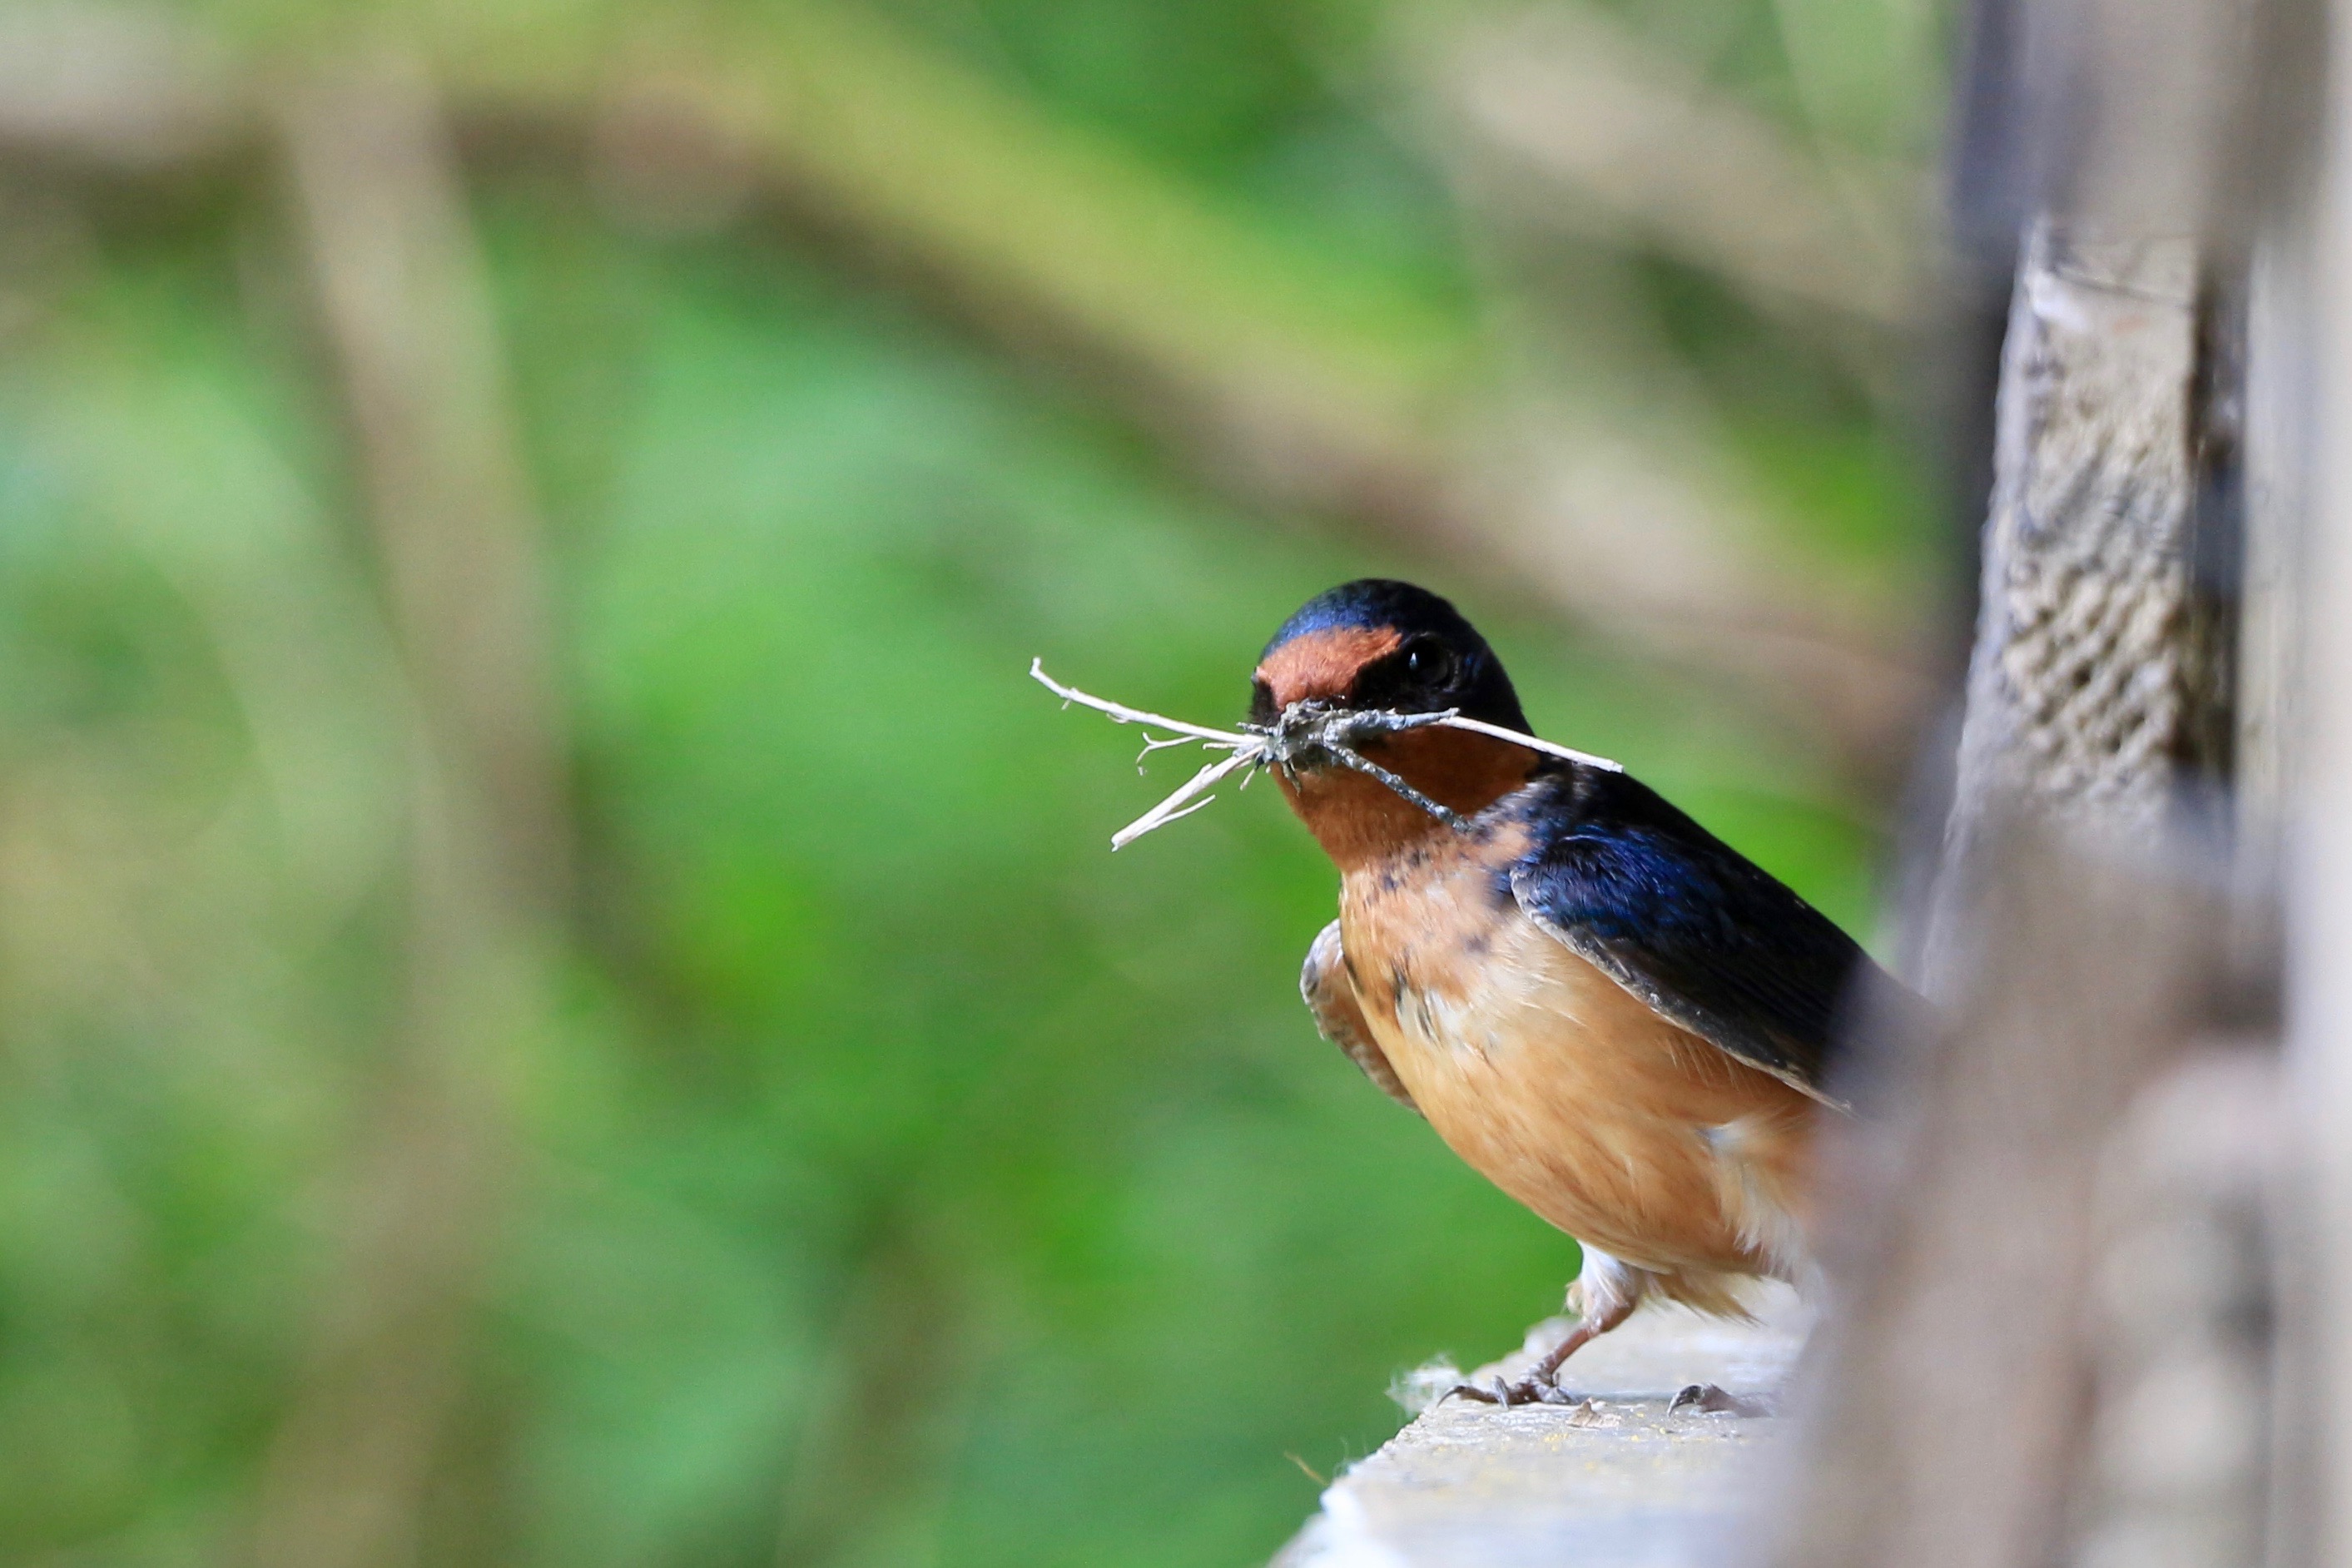 A sweet barn swallow captured with its beak full of twigs from within a bird blind. Barn swallows are tiny and full of beans, and they're very colourful with red faces, blue heads and backs, and an orangeish breast.
